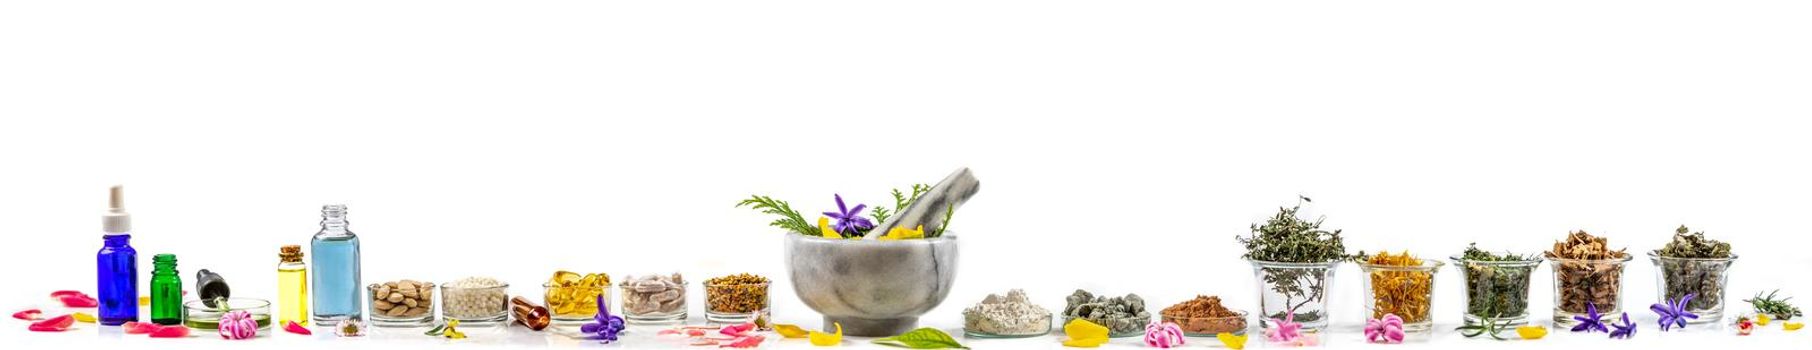 Alternative Medicine - Plant-derived and Natural Products